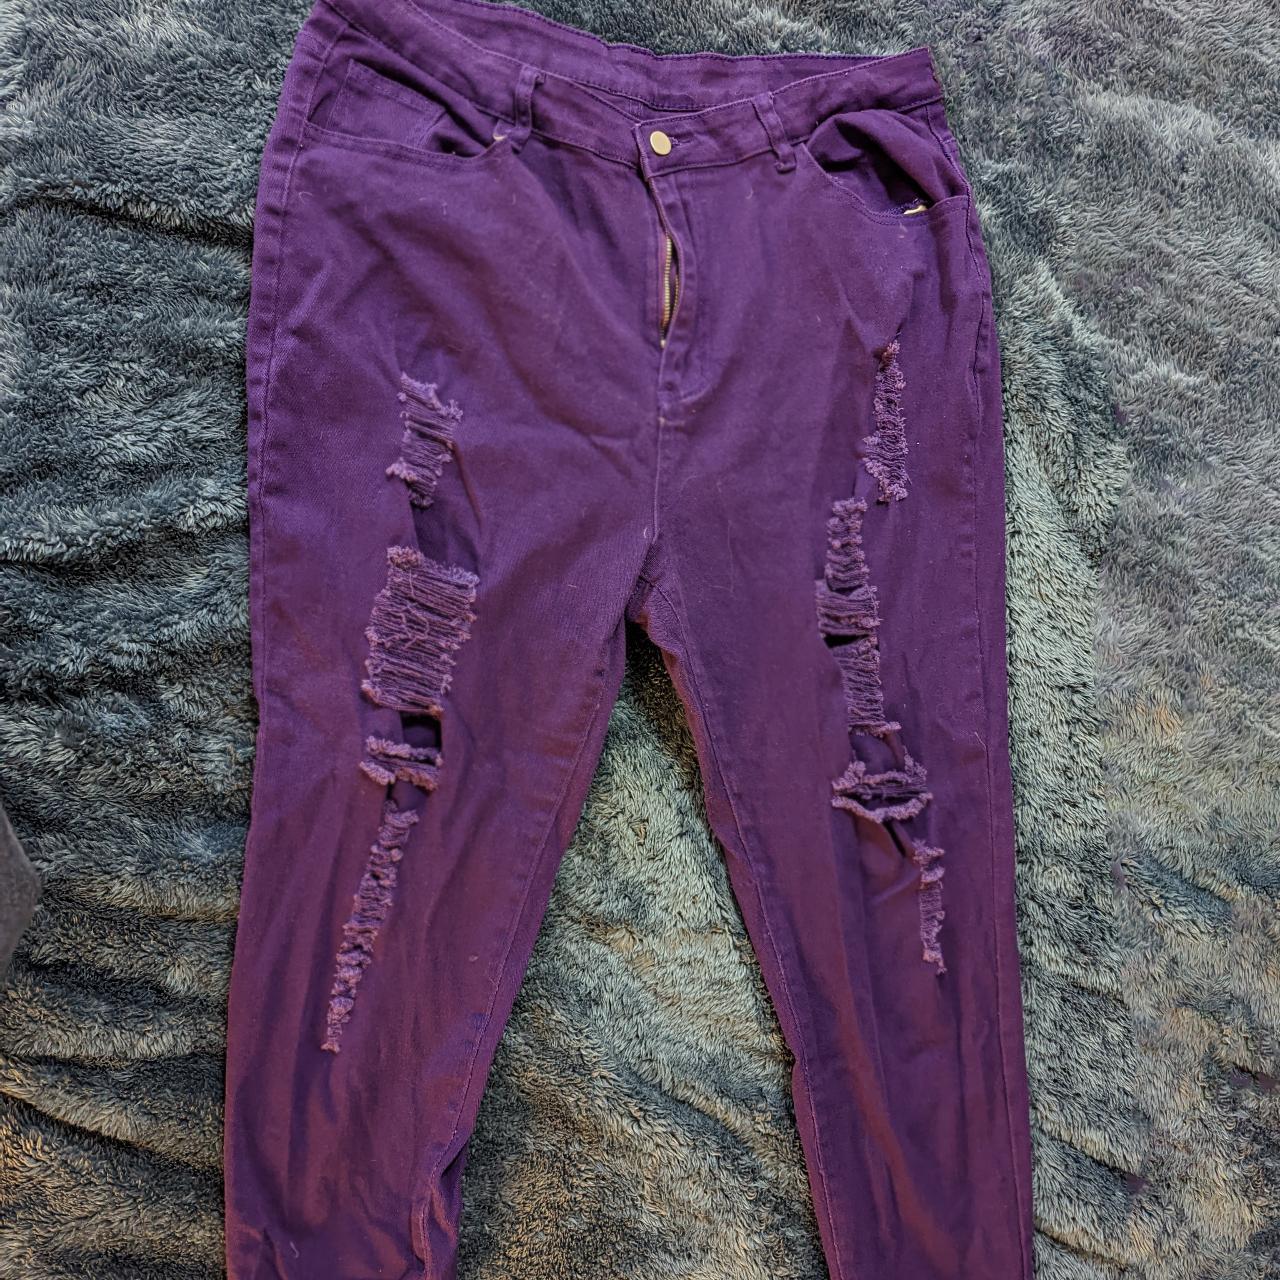 Purple Distressed Jeans from SHEIN - ask for more... - Depop